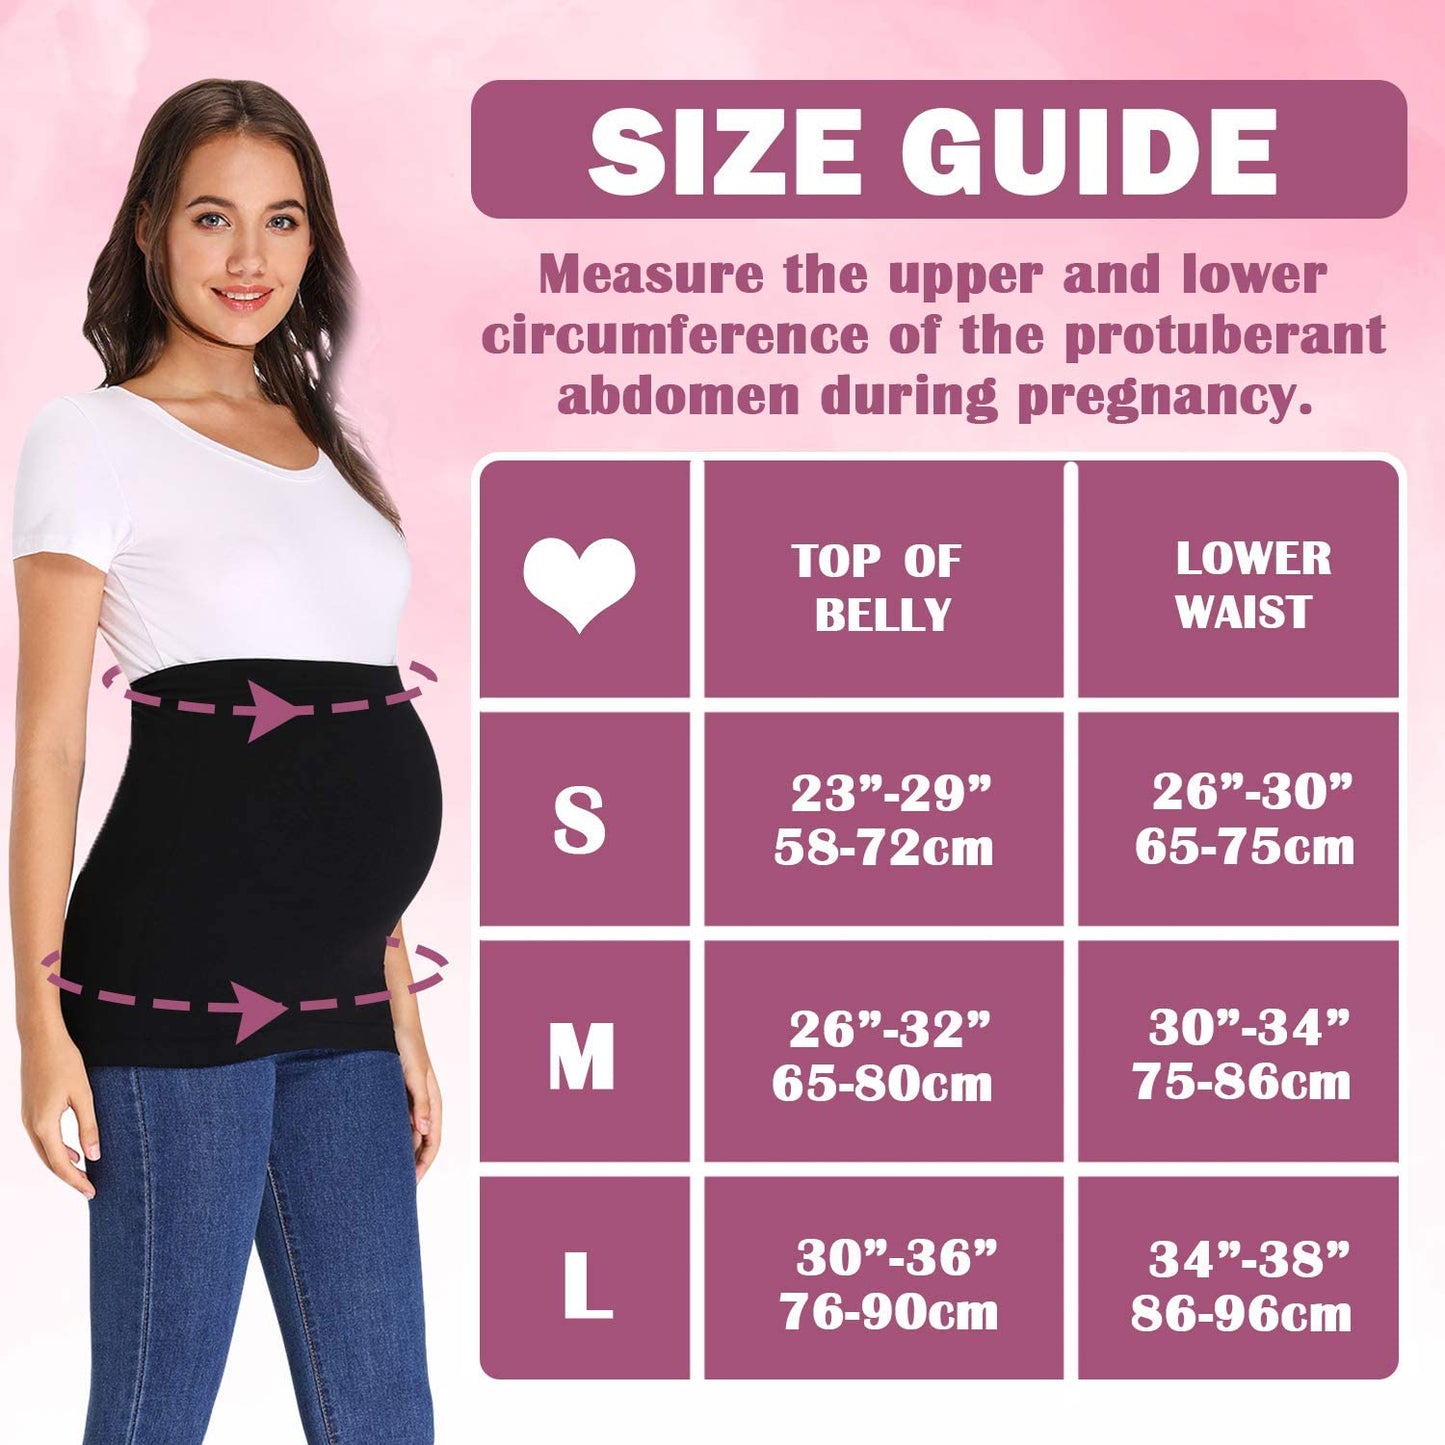 Maternity Belly Band，Maternity Band for Pregnancy Support with Non-Slip Silicone Stretch,Soft Seamless Fabric for All Stage of Pregnancy